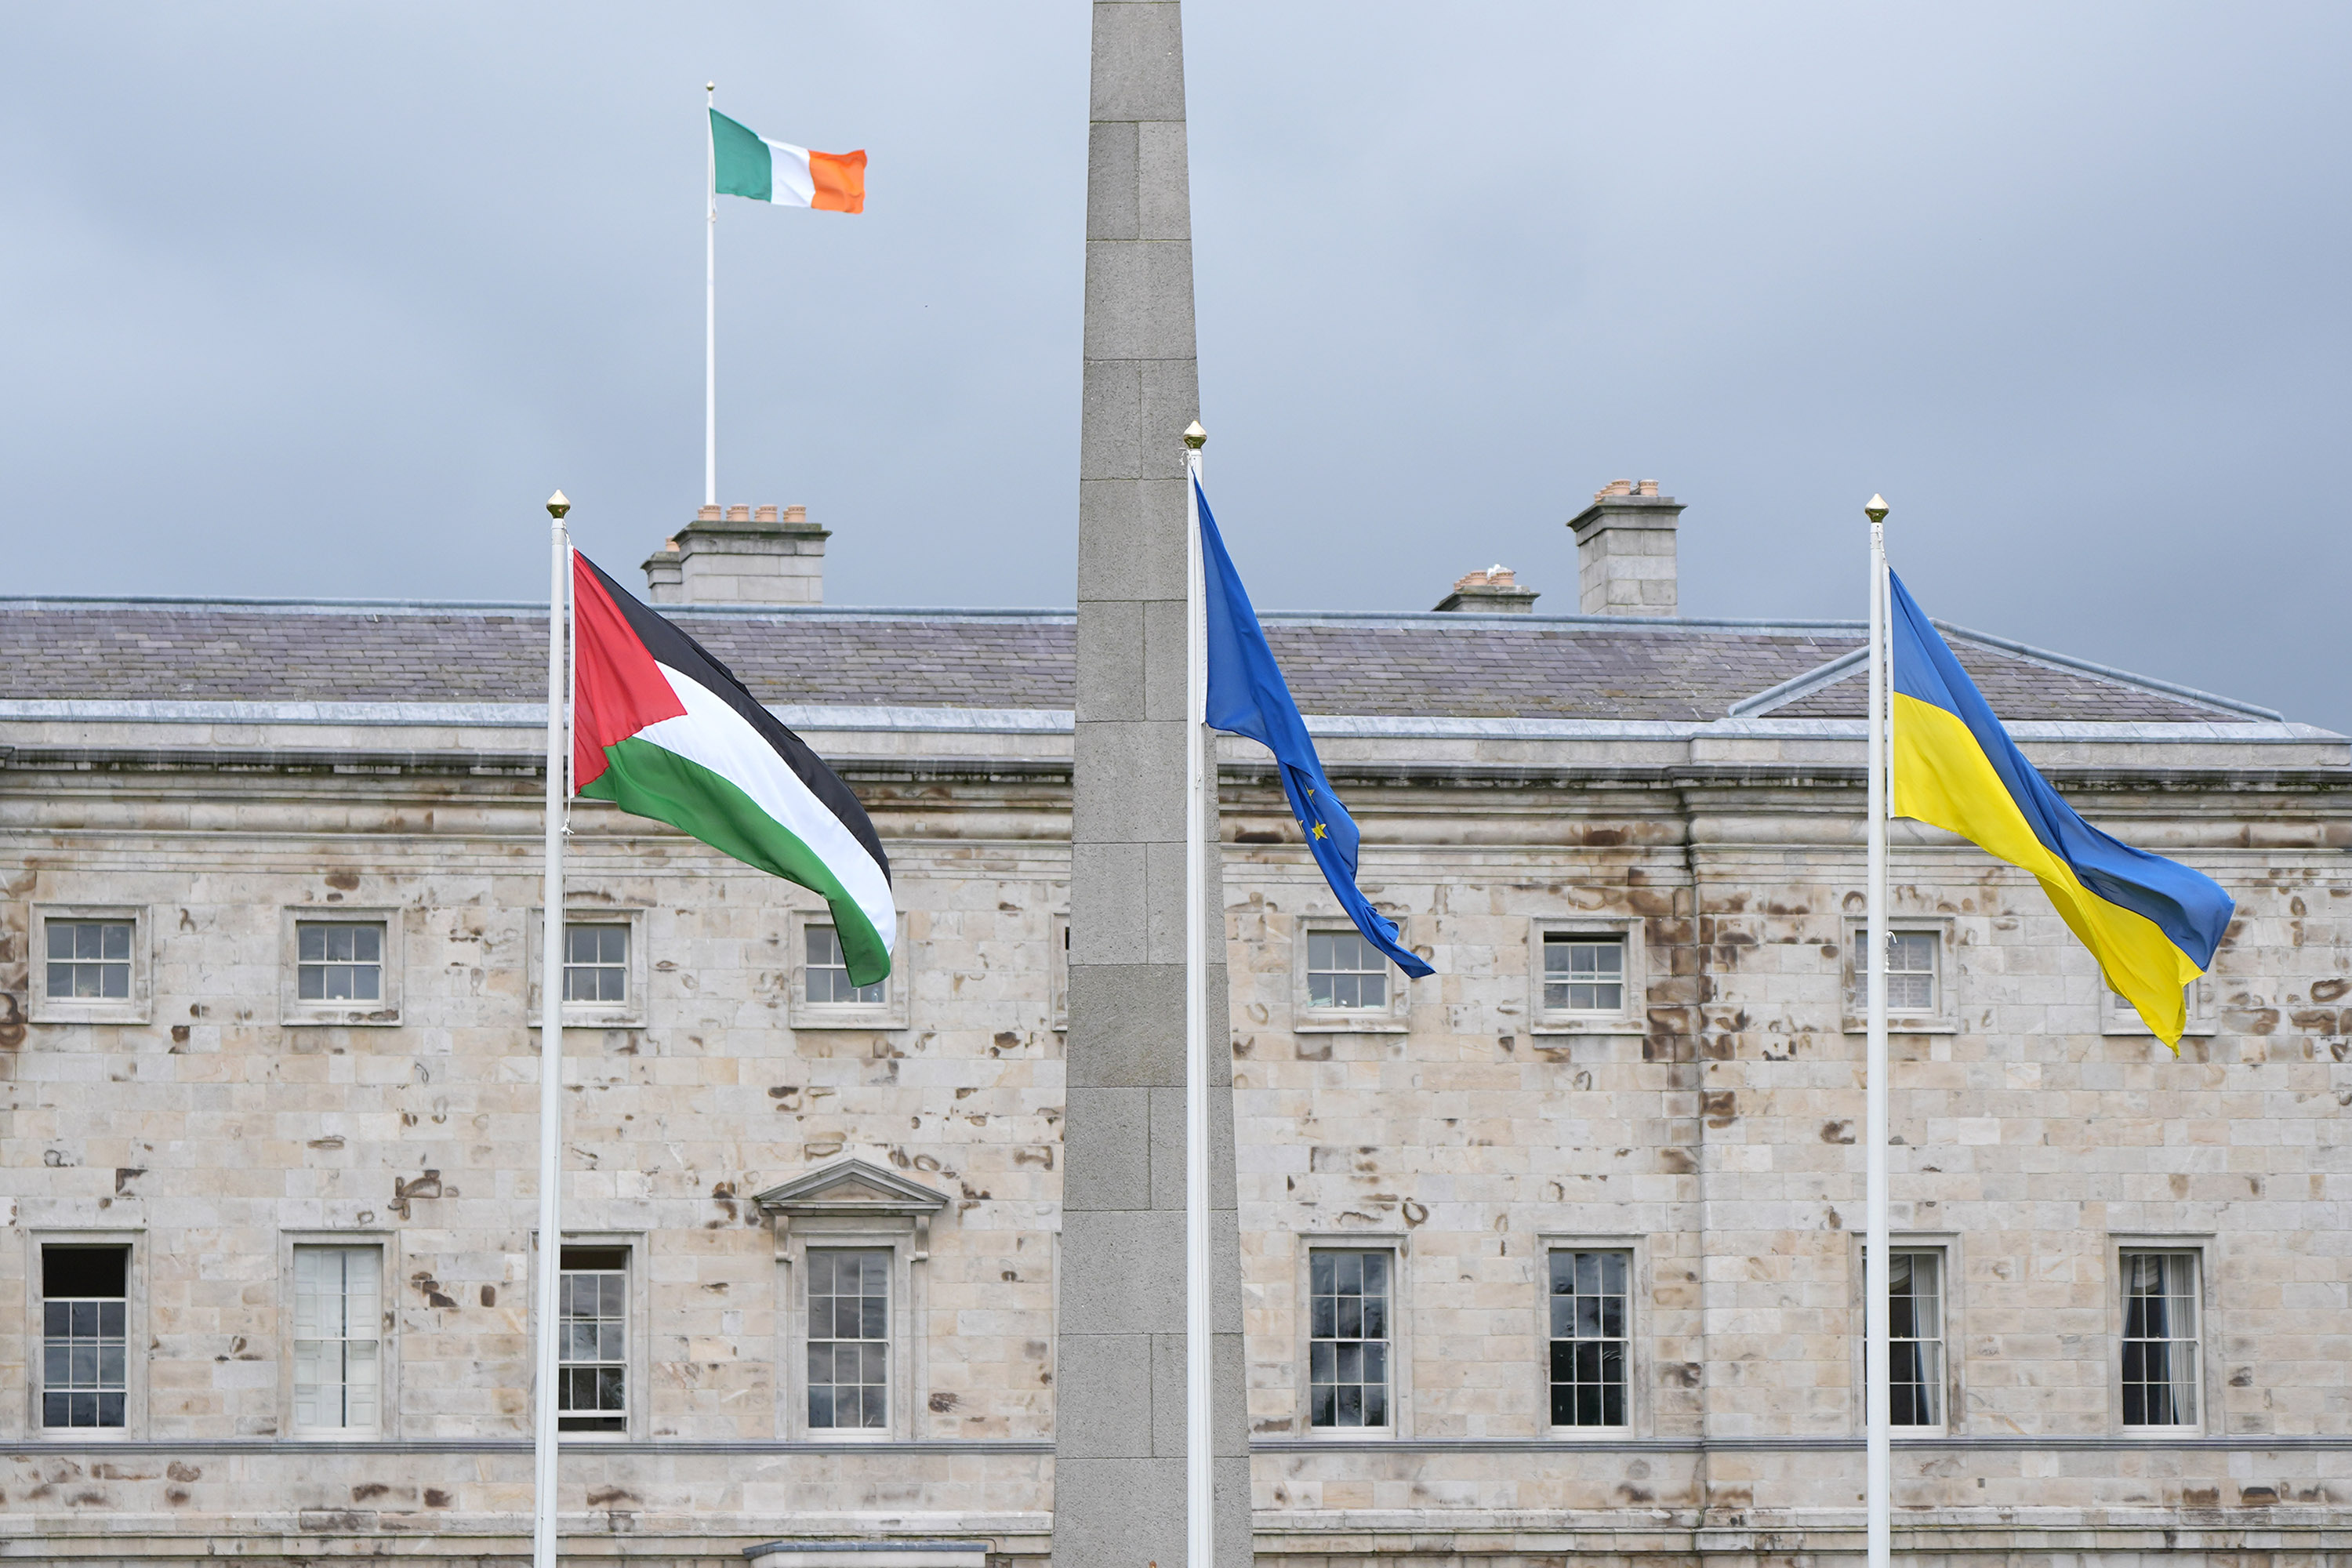 A Palestinian flag, left, flies outside Leinster House in Dublin, following the decision by the Irish government to formally recognize the State of Palestine, on May 28.